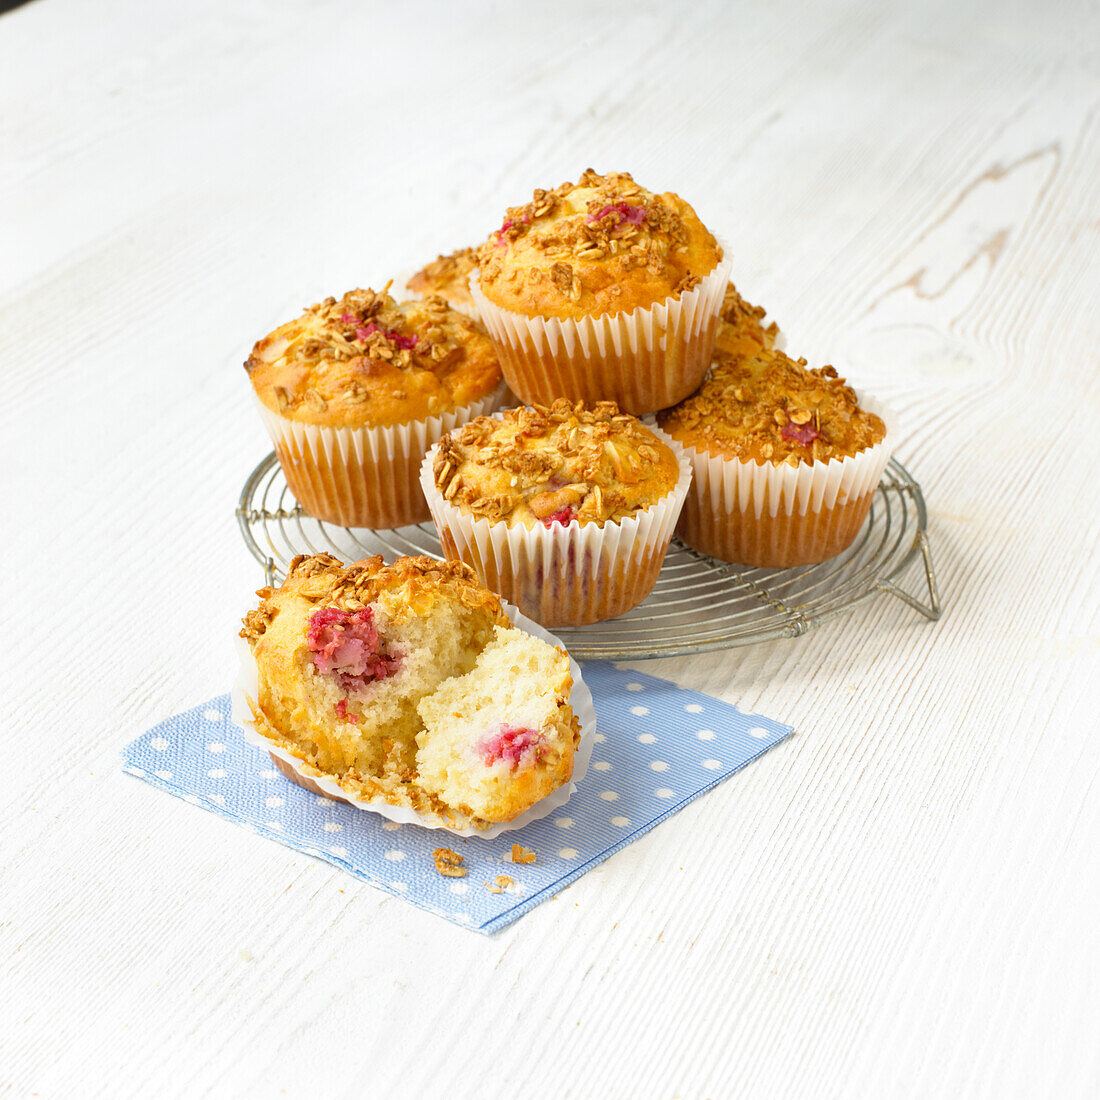 Muffins with a crunchy granola top